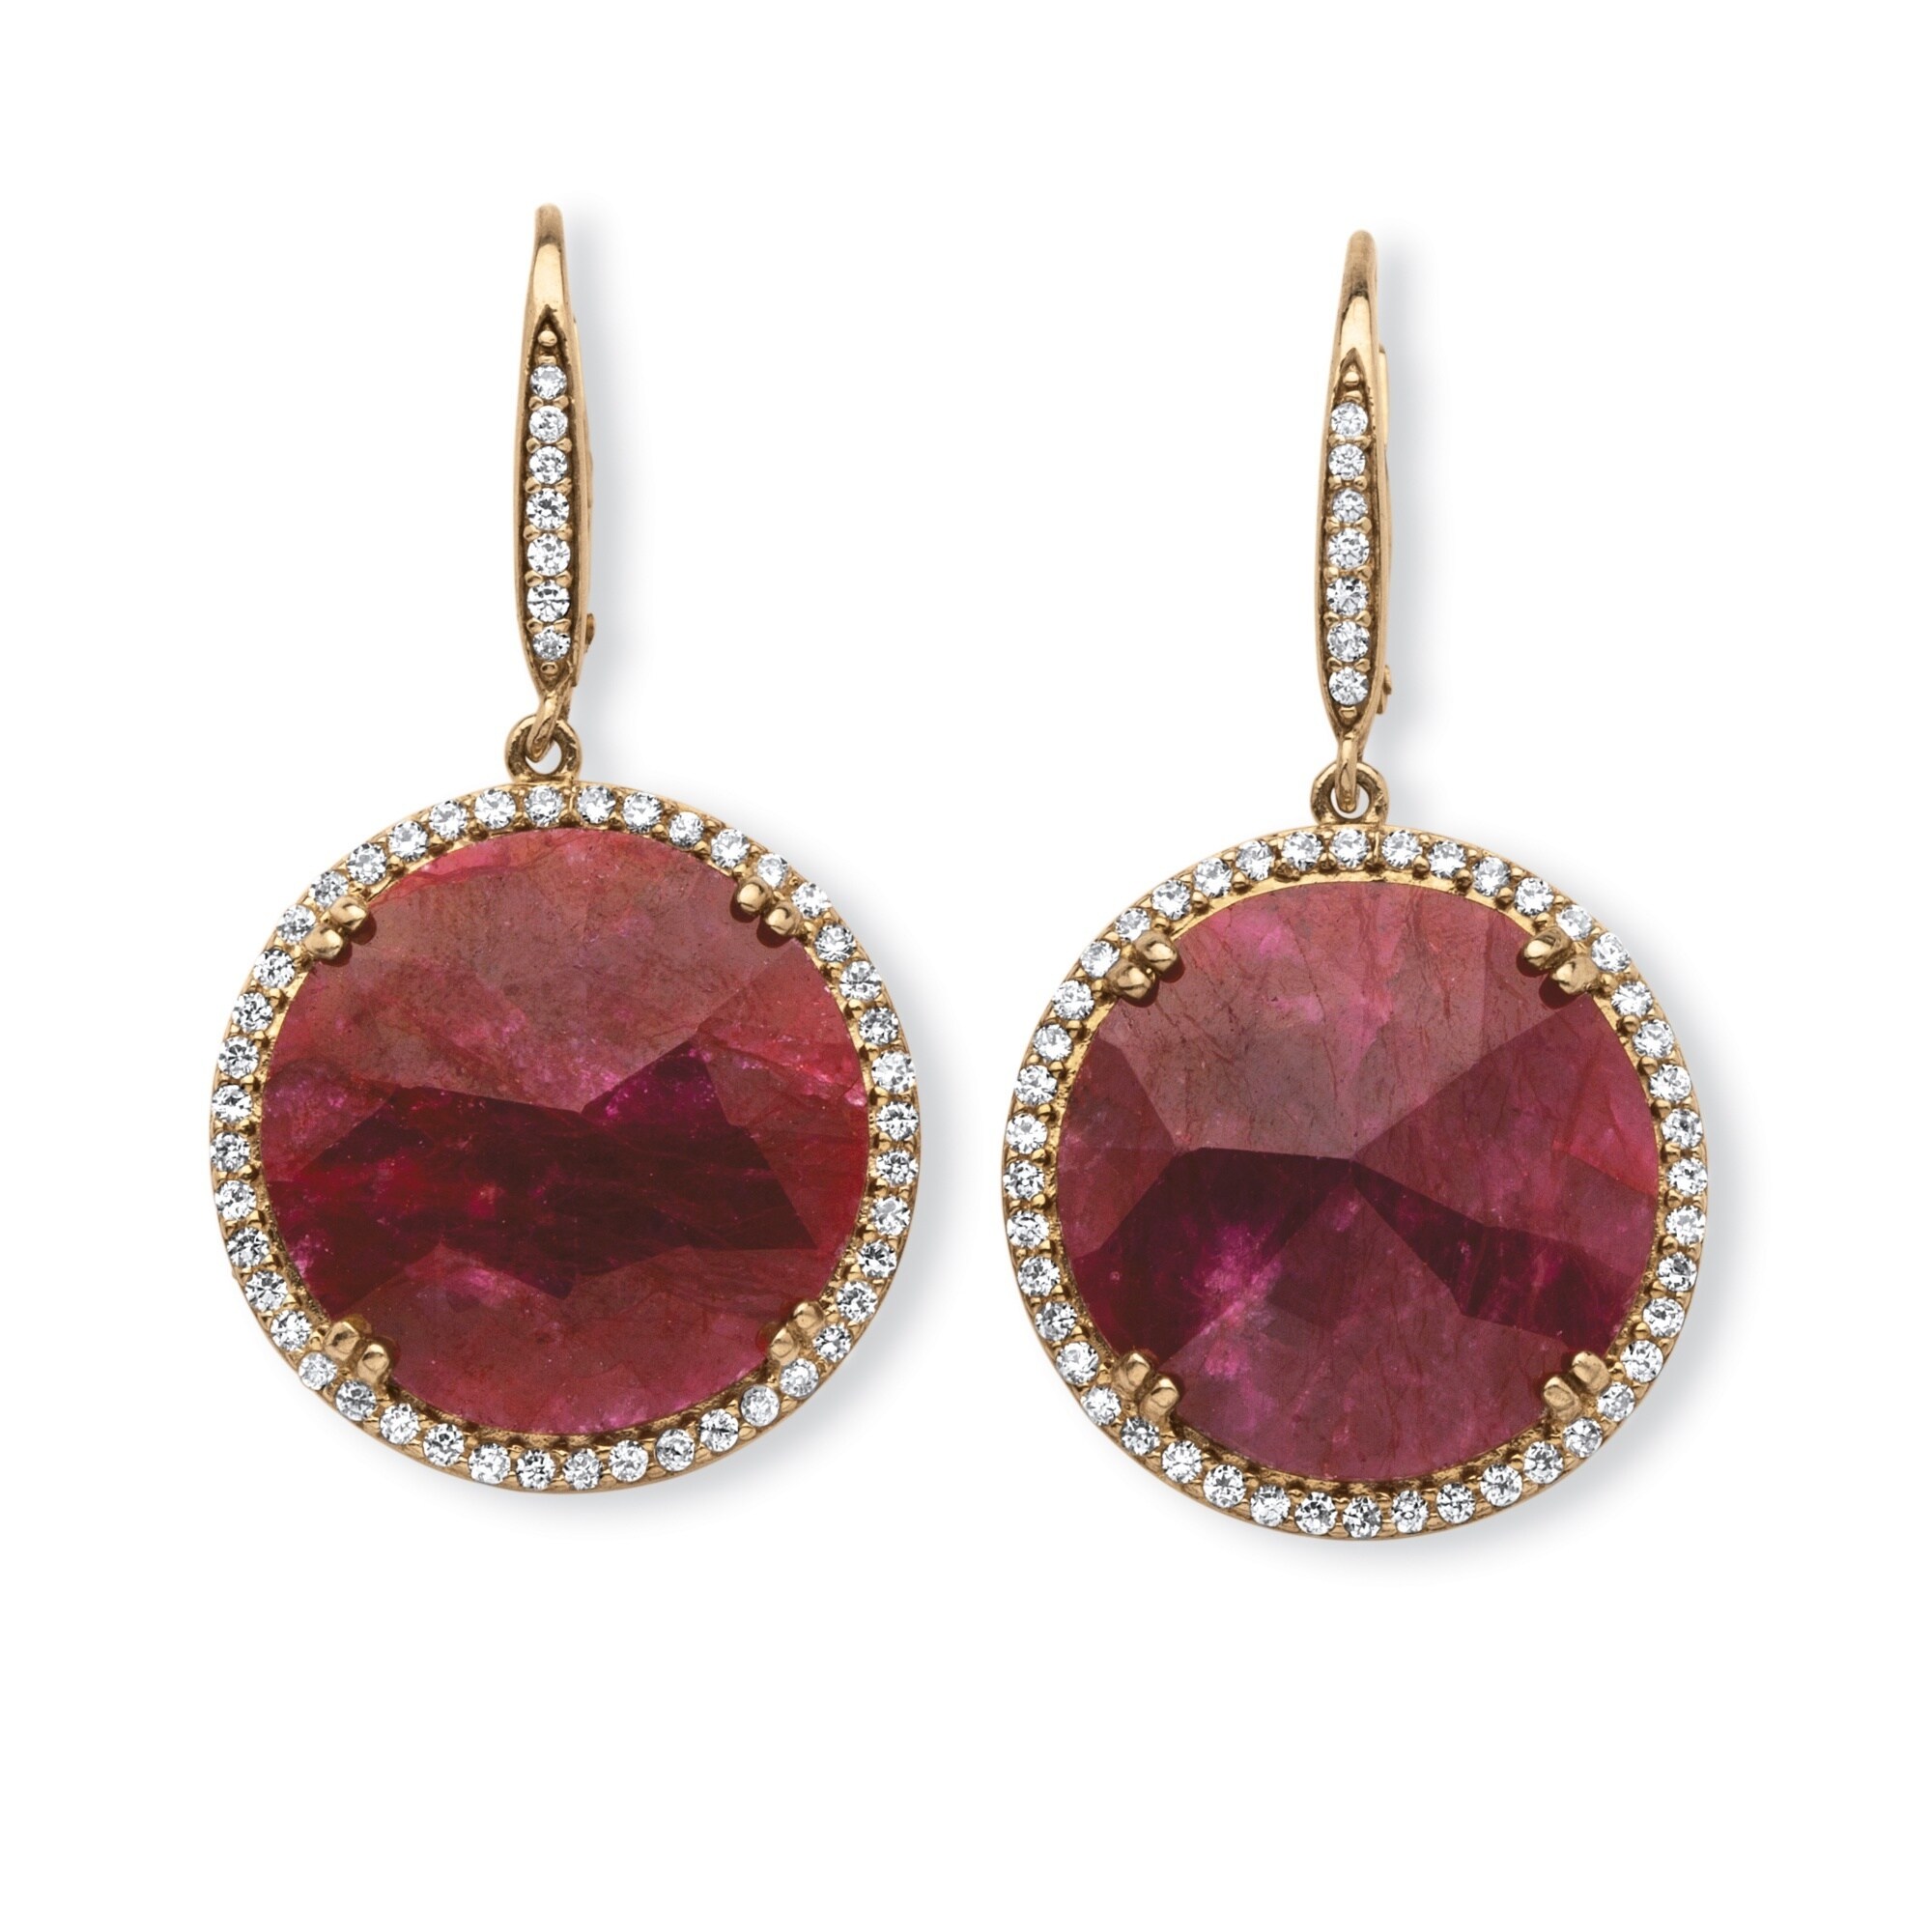 28 7/8ct TCW Genuine Hand-Cut Round Ruby and Pave CZ Halo Earrings in 14k  Gold over Sterli